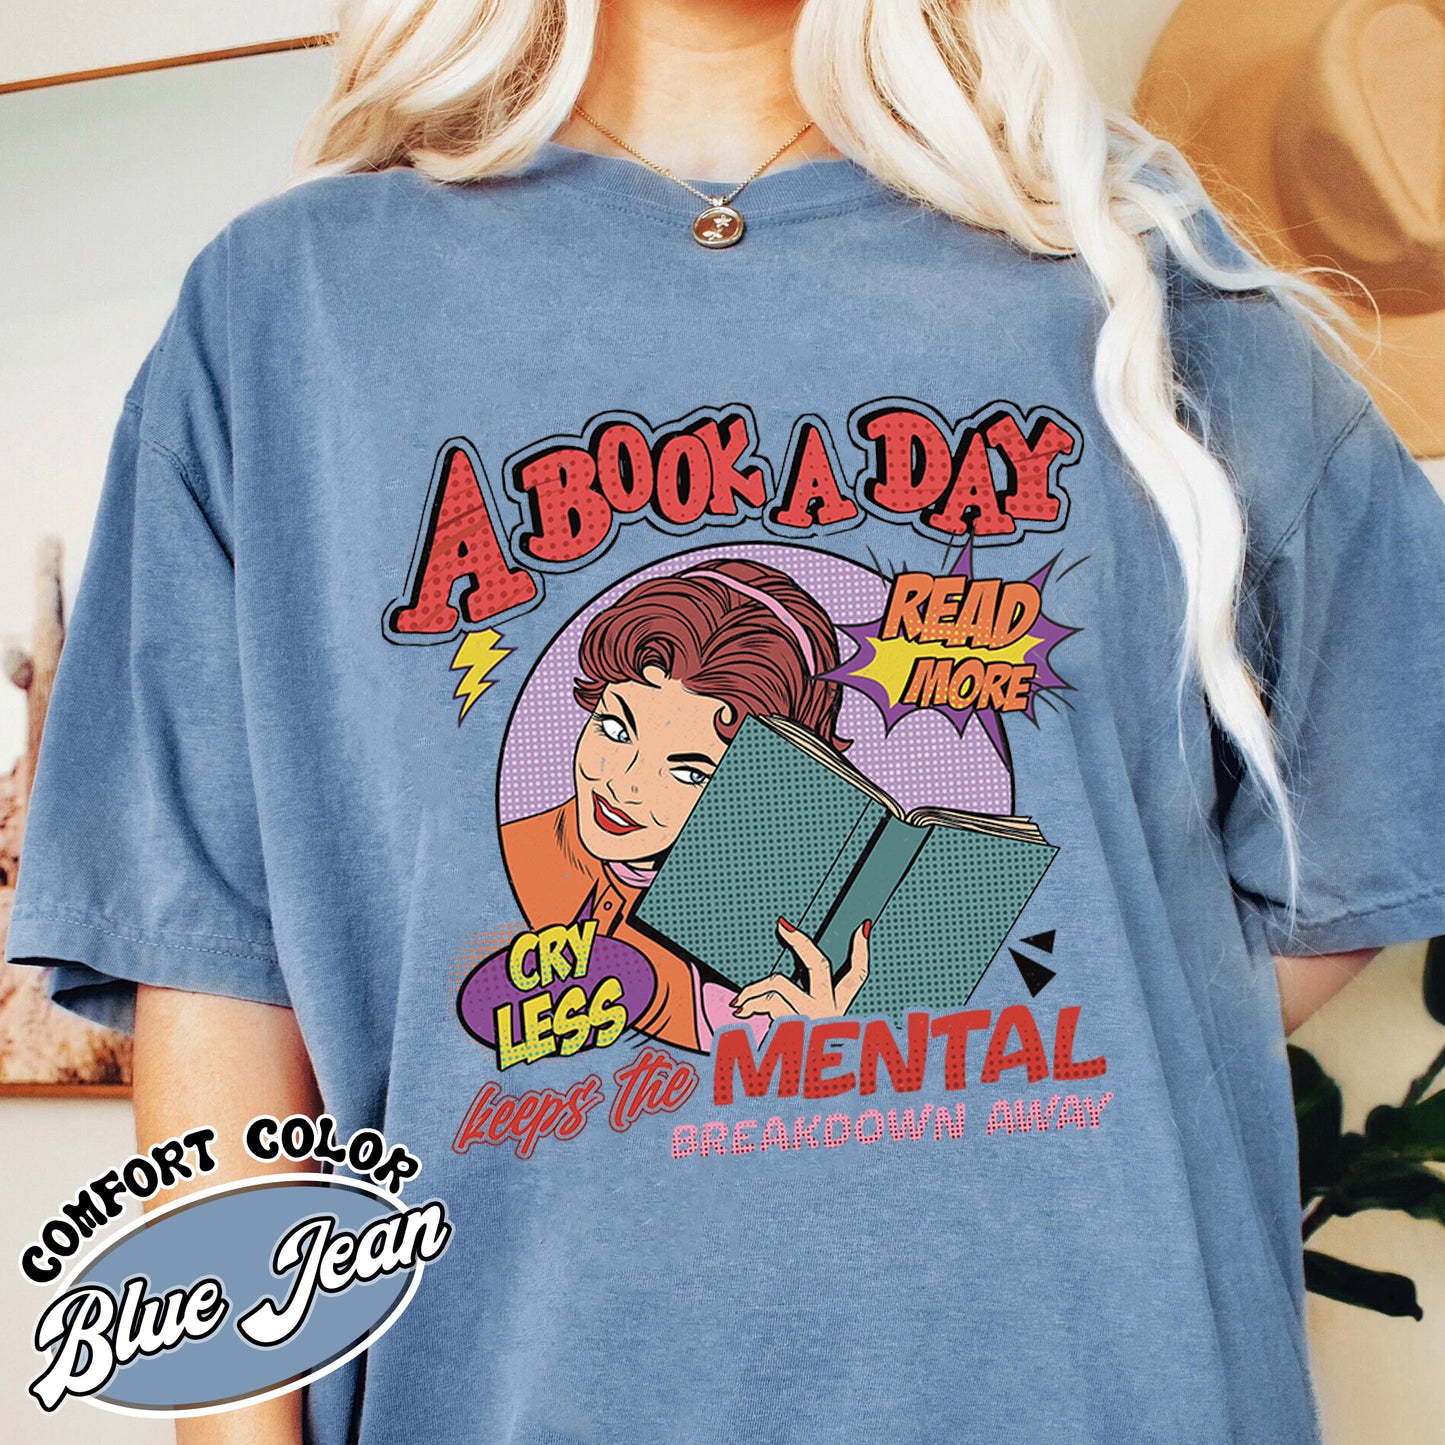 A Book a Day Keep the Mental Breakdown Away Comfort Color Shirt, Book Shirt, Book Gift, Book Lover Gift